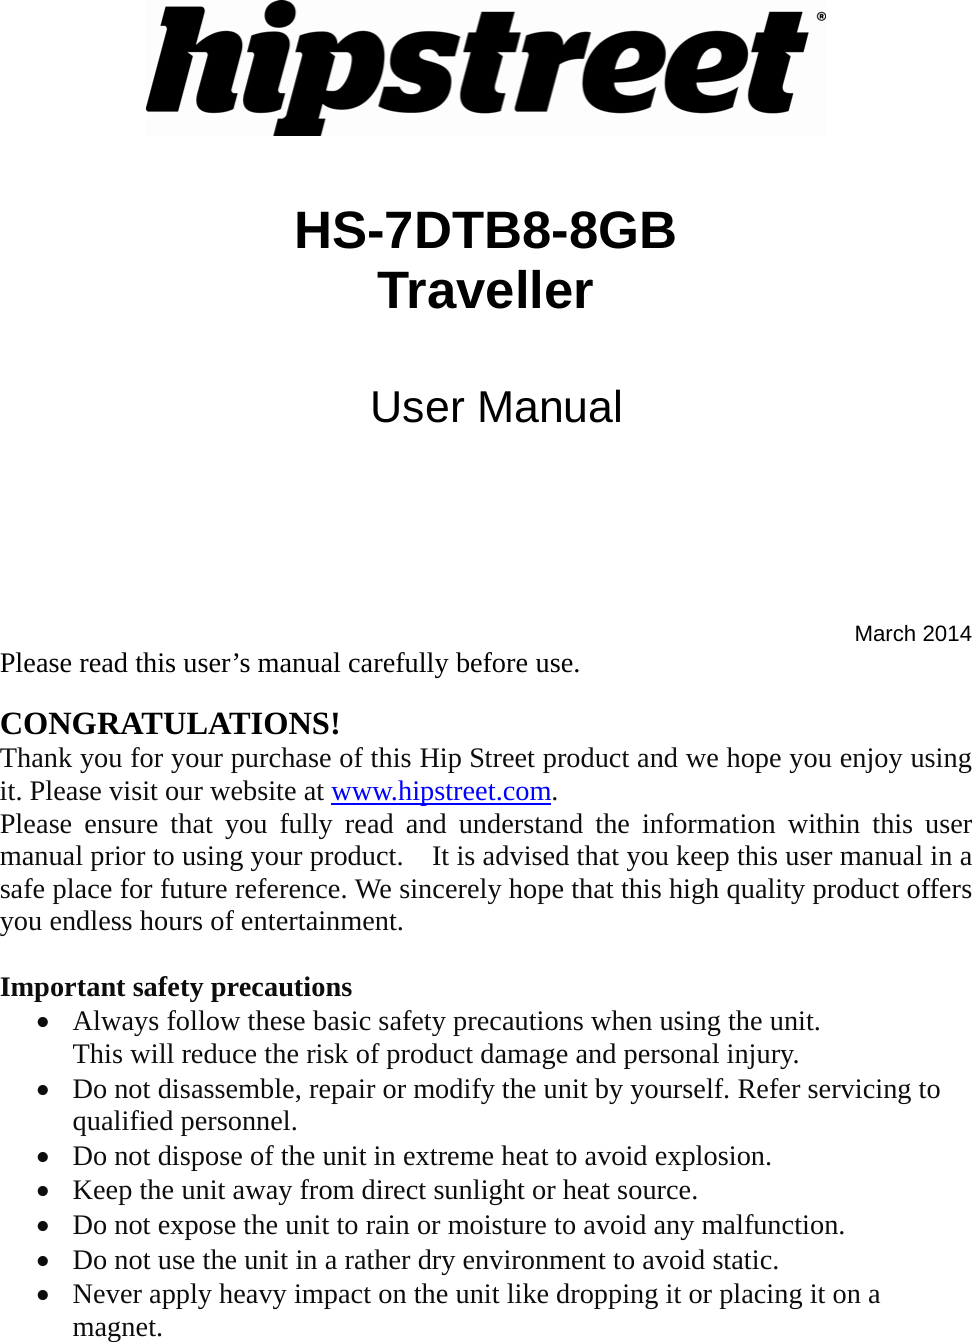    HS-7DTB8-8GB  Traveller   User Manual     March 2014 Please read this user’s manual carefully before use.  CONGRATULATIONS! Thank you for your purchase of this Hip Street product and we hope you enjoy using it. Please visit our website at www.hipstreet.com.   Please ensure that you fully read and understand the information within this user manual prior to using your product.    It is advised that you keep this user manual in a safe place for future reference. We sincerely hope that this high quality product offers you endless hours of entertainment.  Important safety precautions • Always follow these basic safety precautions when using the unit.   This will reduce the risk of product damage and personal injury. • Do not disassemble, repair or modify the unit by yourself. Refer servicing to qualified personnel. • Do not dispose of the unit in extreme heat to avoid explosion. • Keep the unit away from direct sunlight or heat source.   • Do not expose the unit to rain or moisture to avoid any malfunction. • Do not use the unit in a rather dry environment to avoid static. • Never apply heavy impact on the unit like dropping it or placing it on a magnet. 